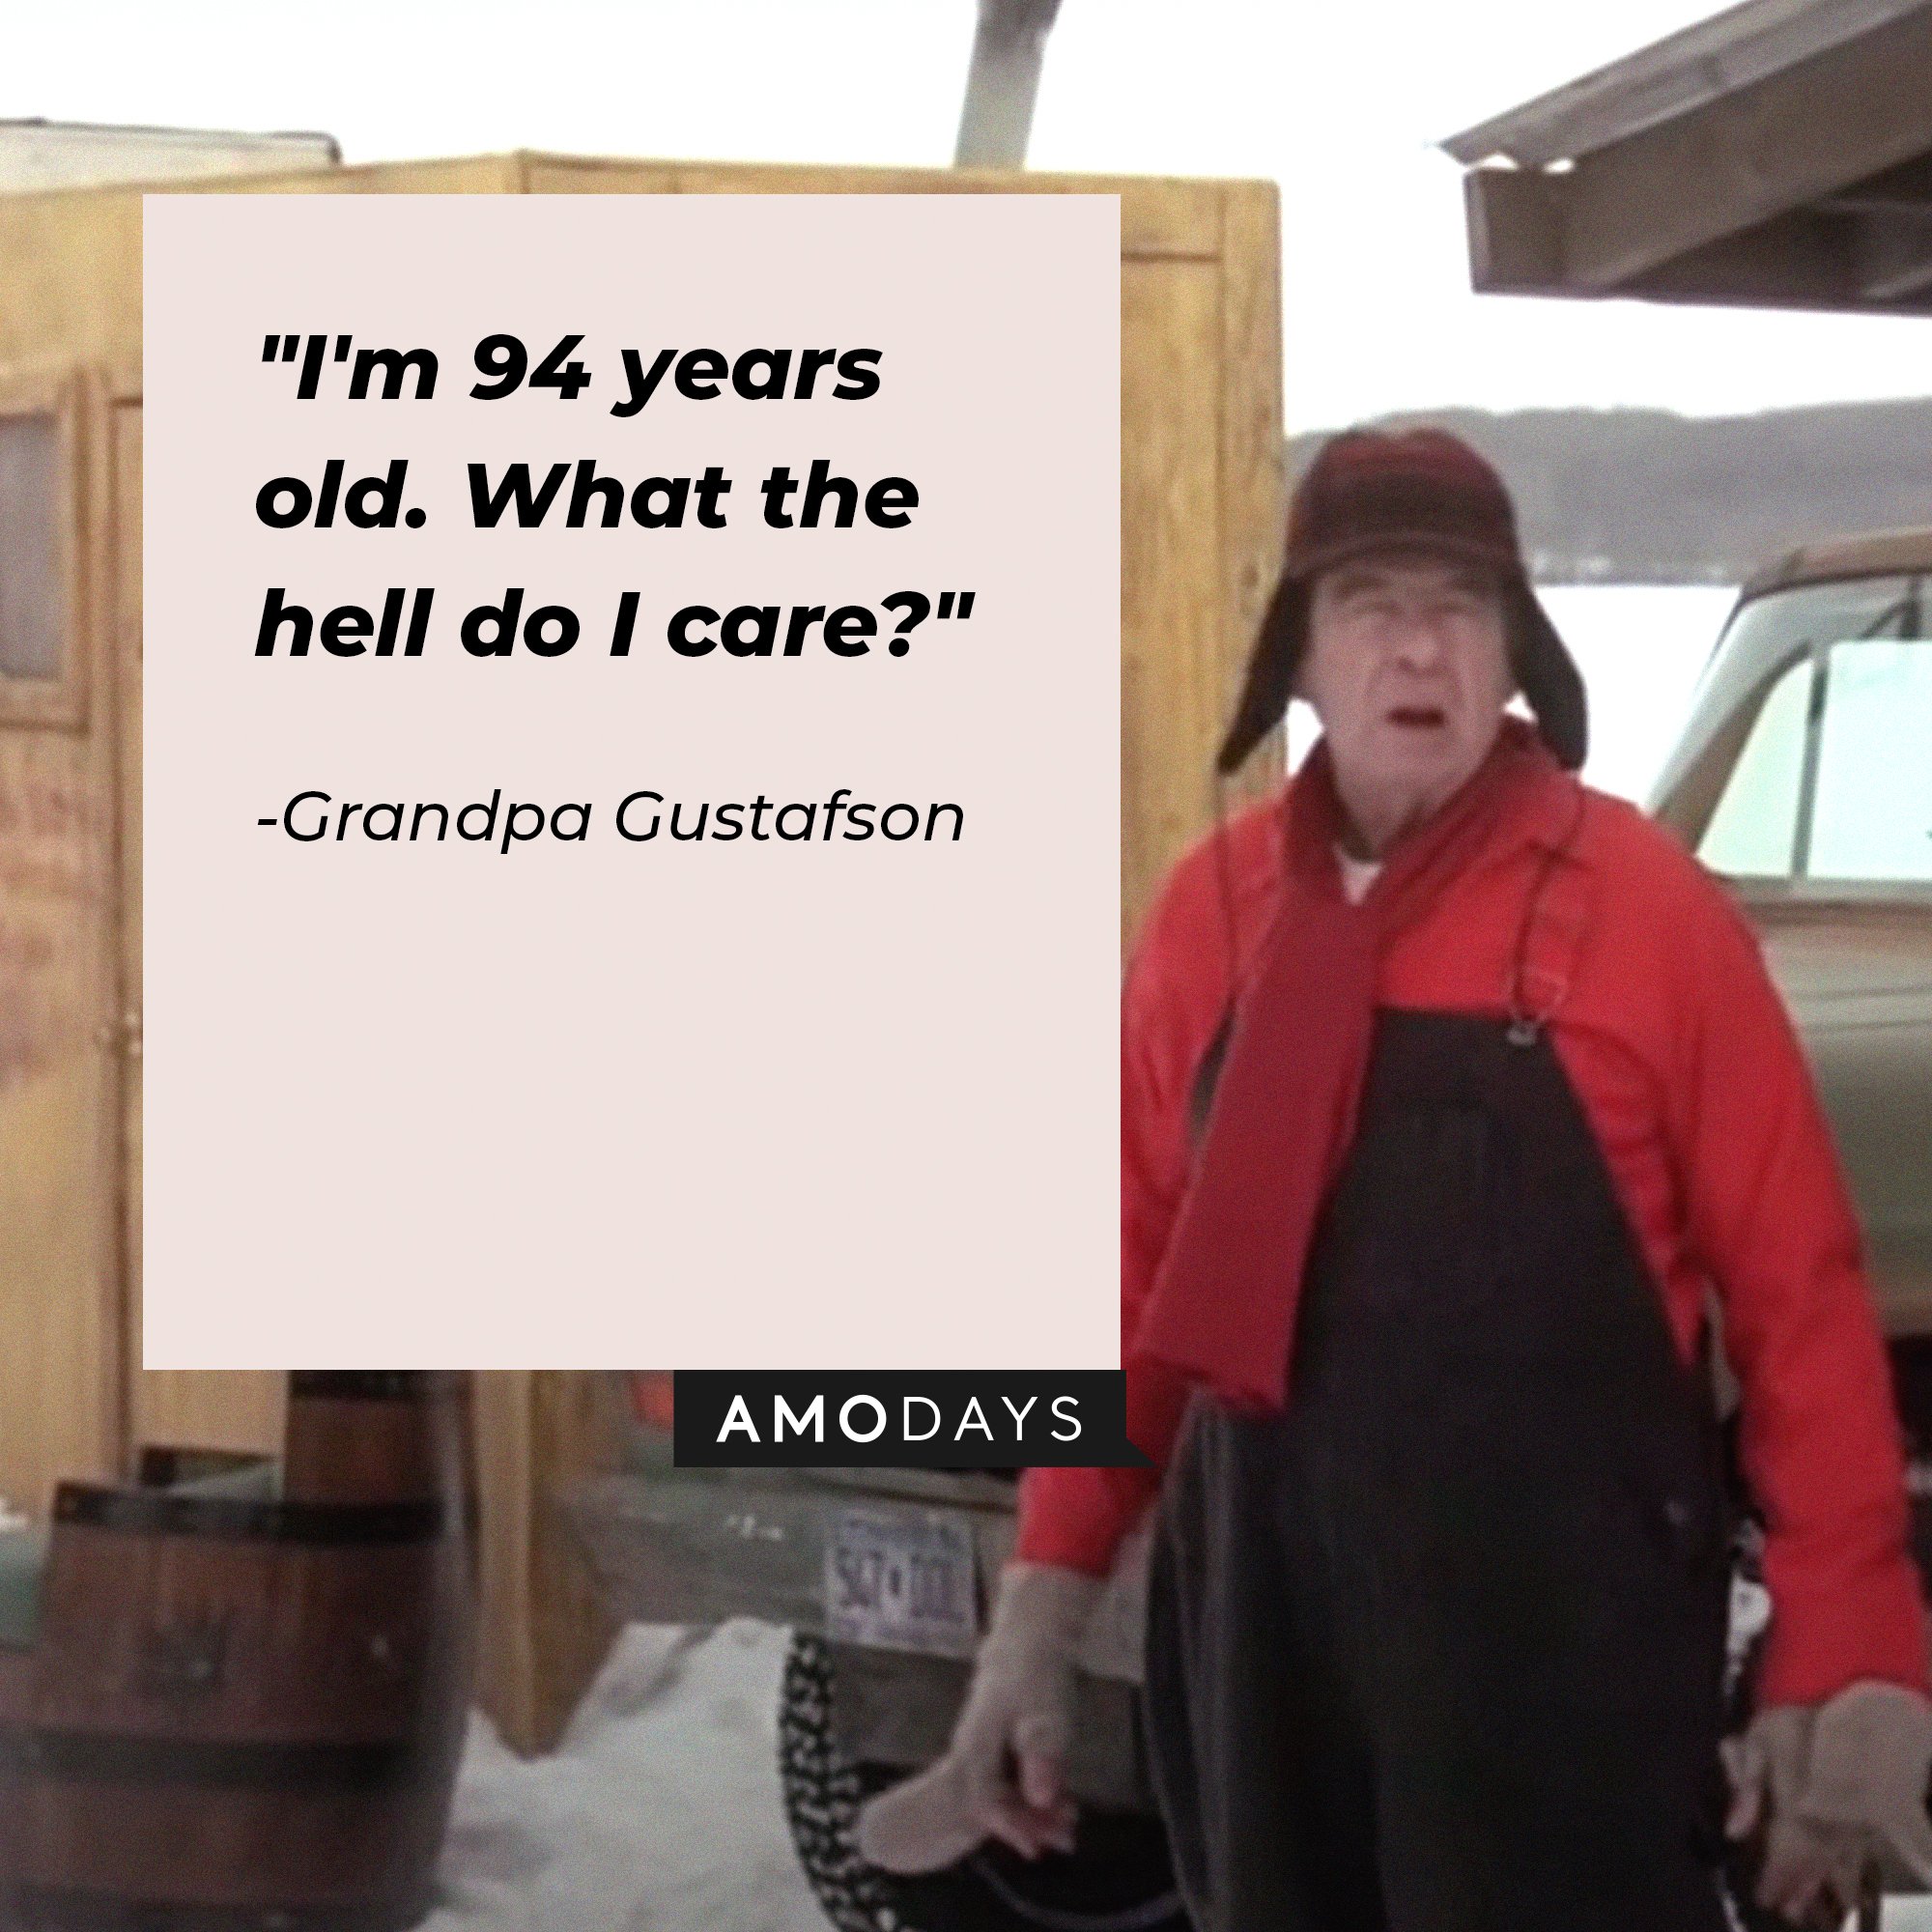 Grandpa Gustafson’s quote: "I'm 94 years old. What the hell do I care?” | Image: AmoDays